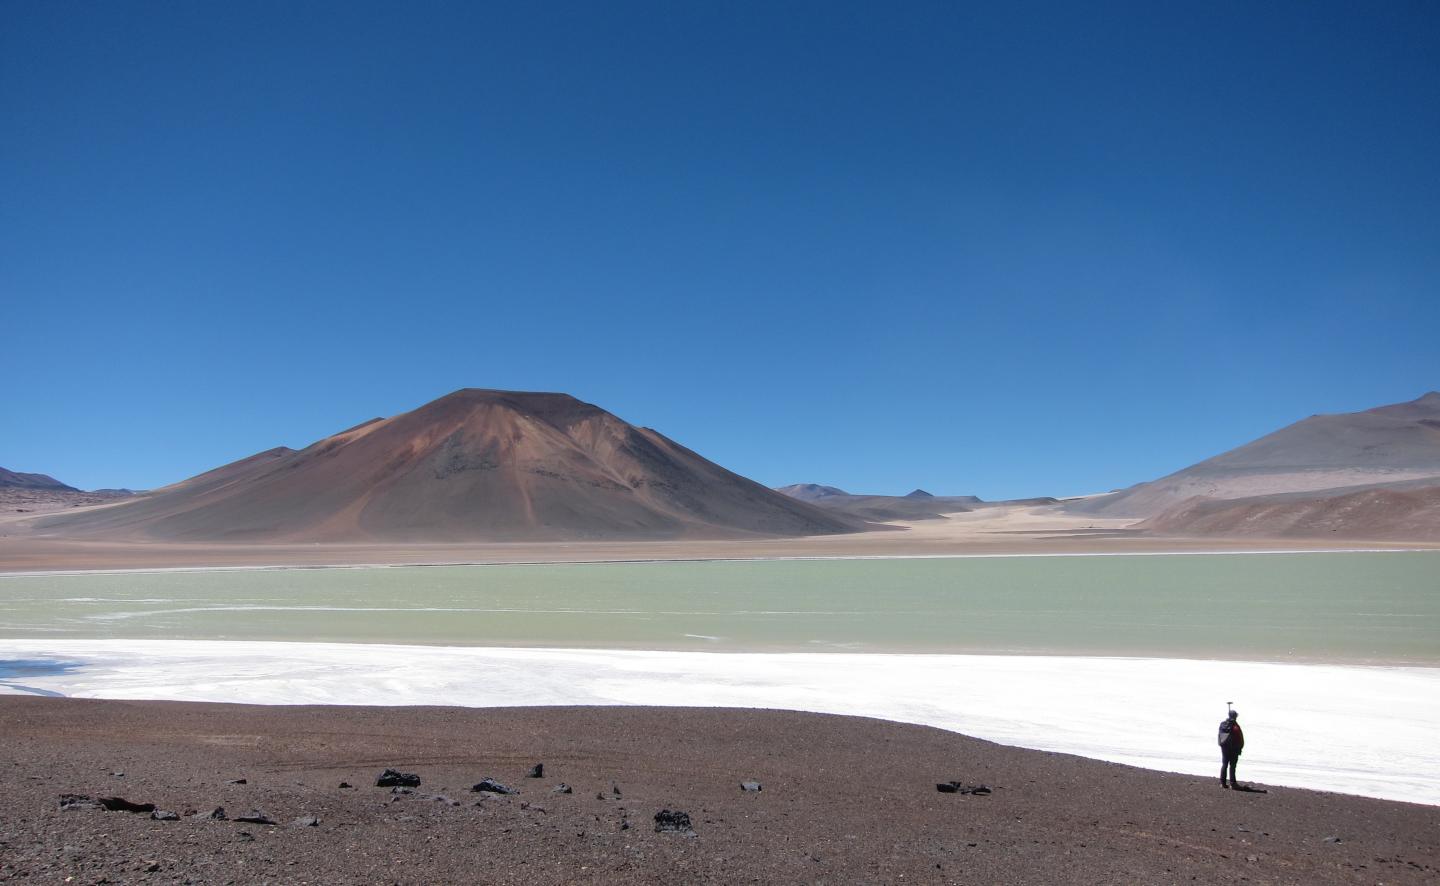 The Altiplano-Puna plateau in the central Andes features vast plains punctuated by spectacular volcanoes, such as the Lazufre volcanic complex in Chile on the picture. Image credit: Noah Finnegan